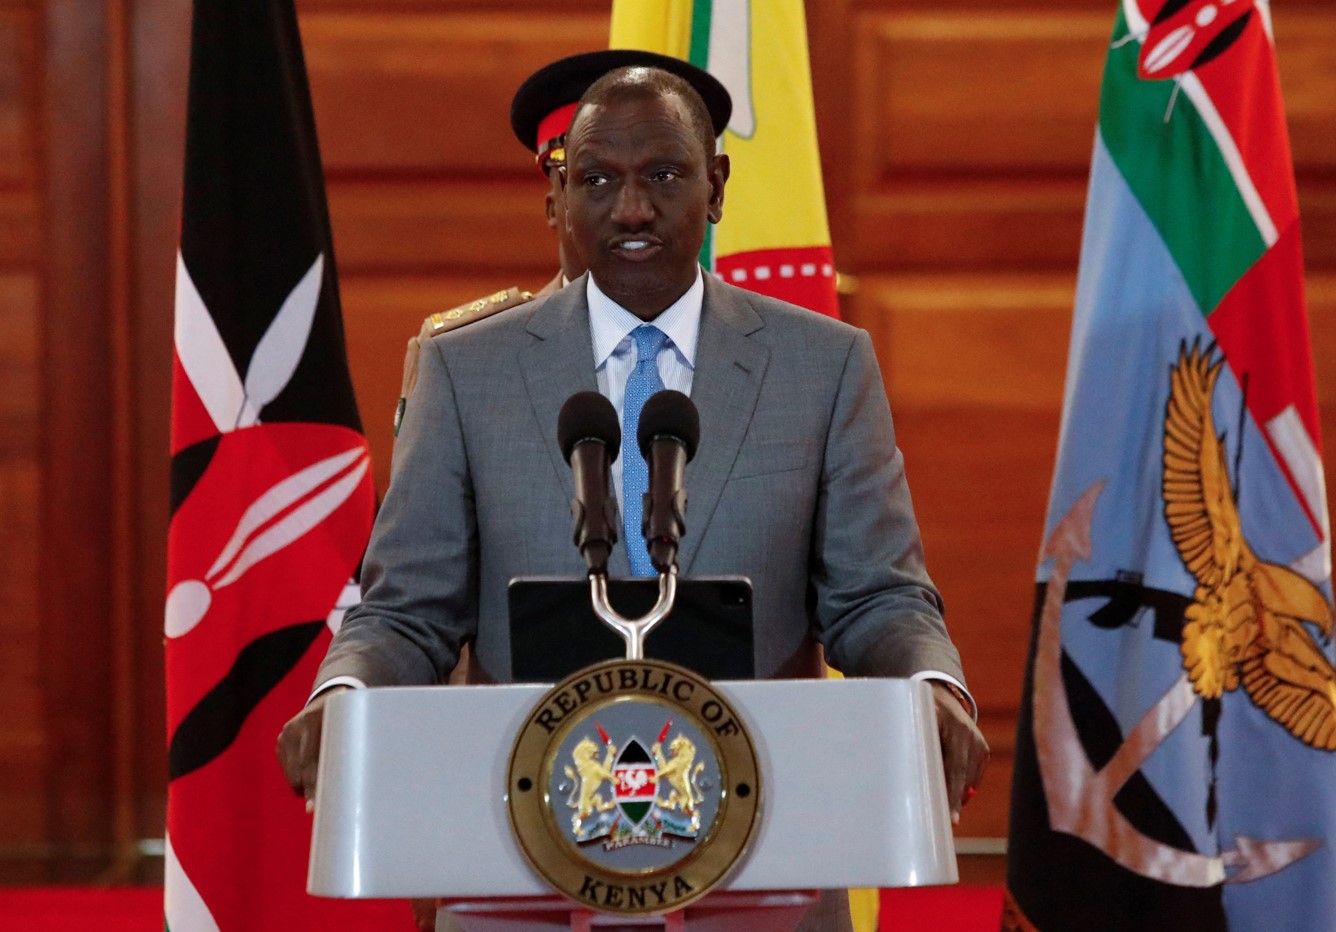 Deadly protests forces cancellation, postponement of key conferences as Ruto withdraws attendance